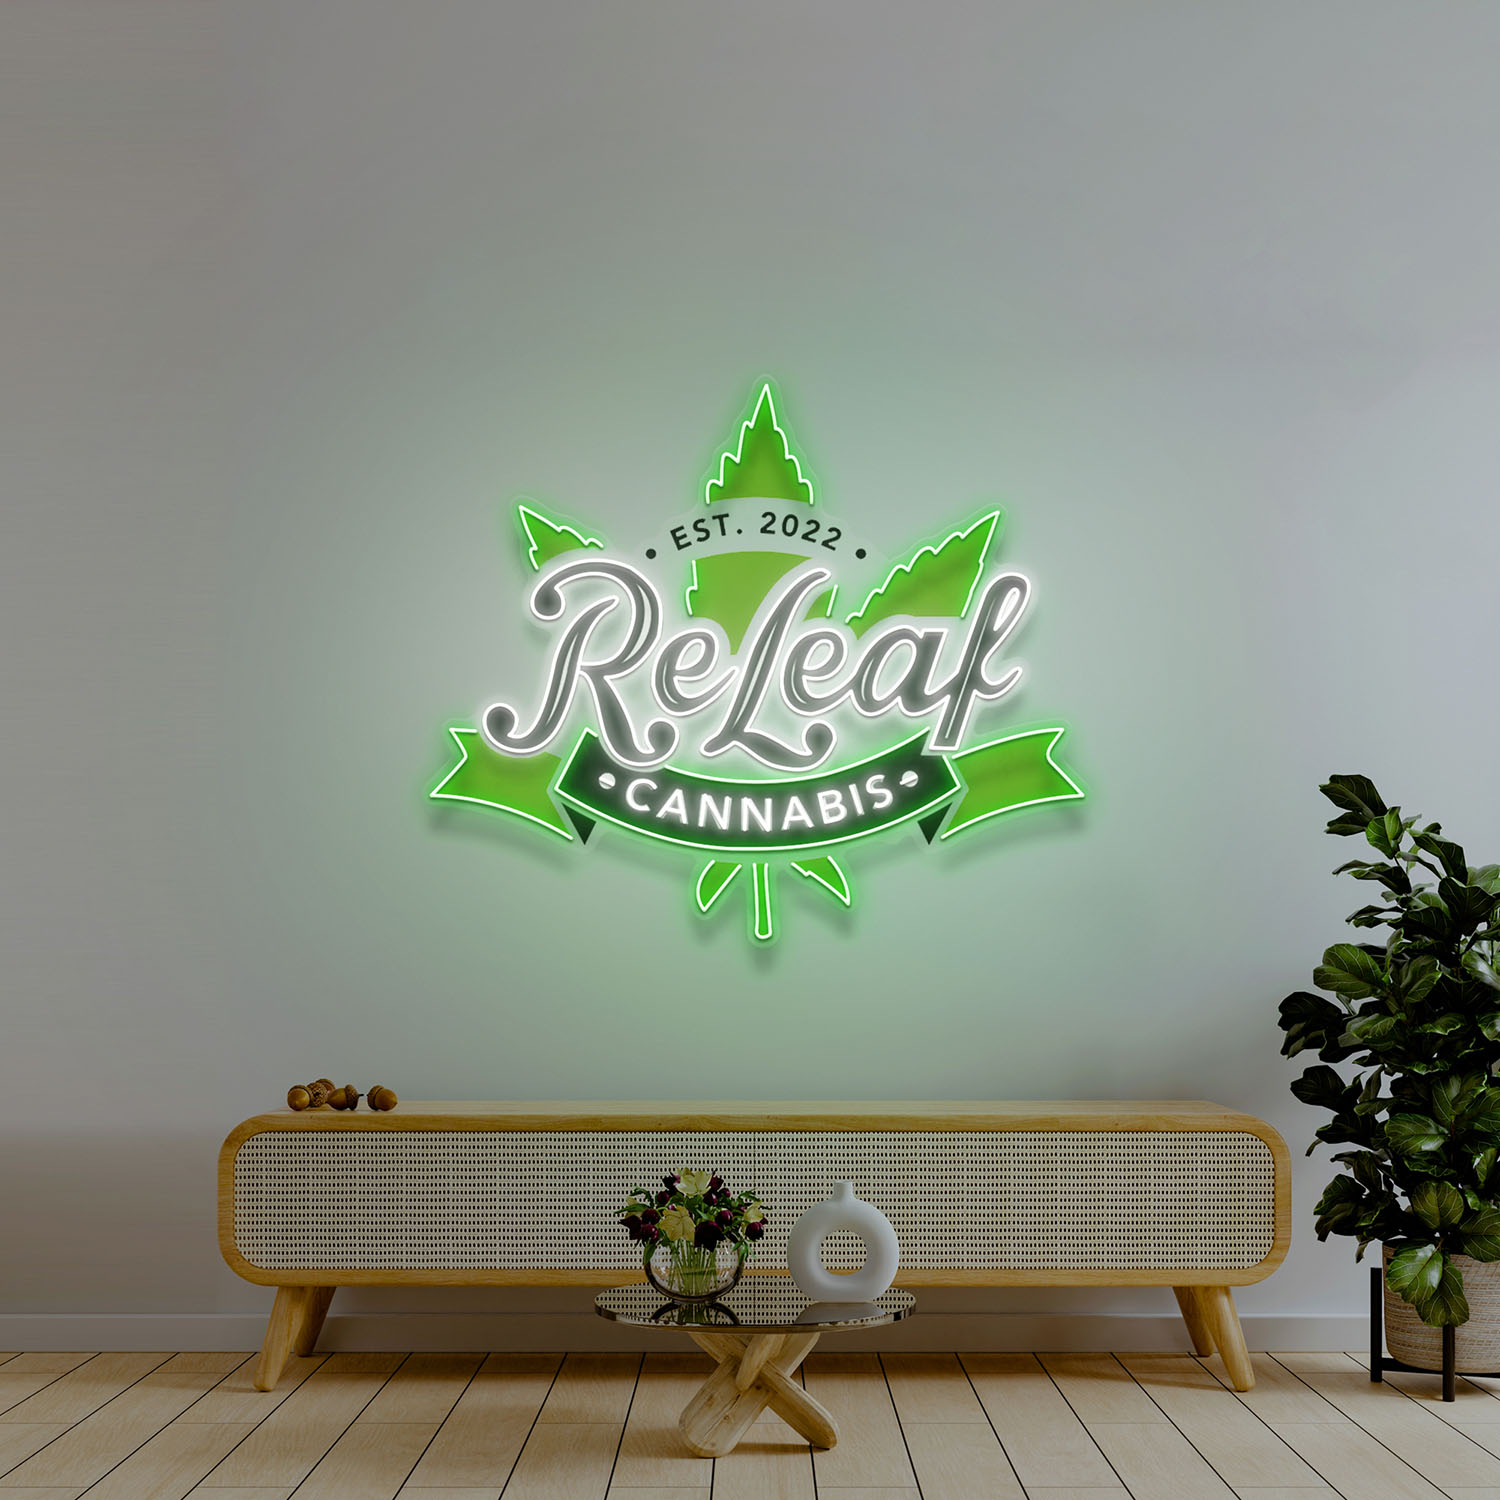 ReLeaf cannabis dispensary in New Jersey